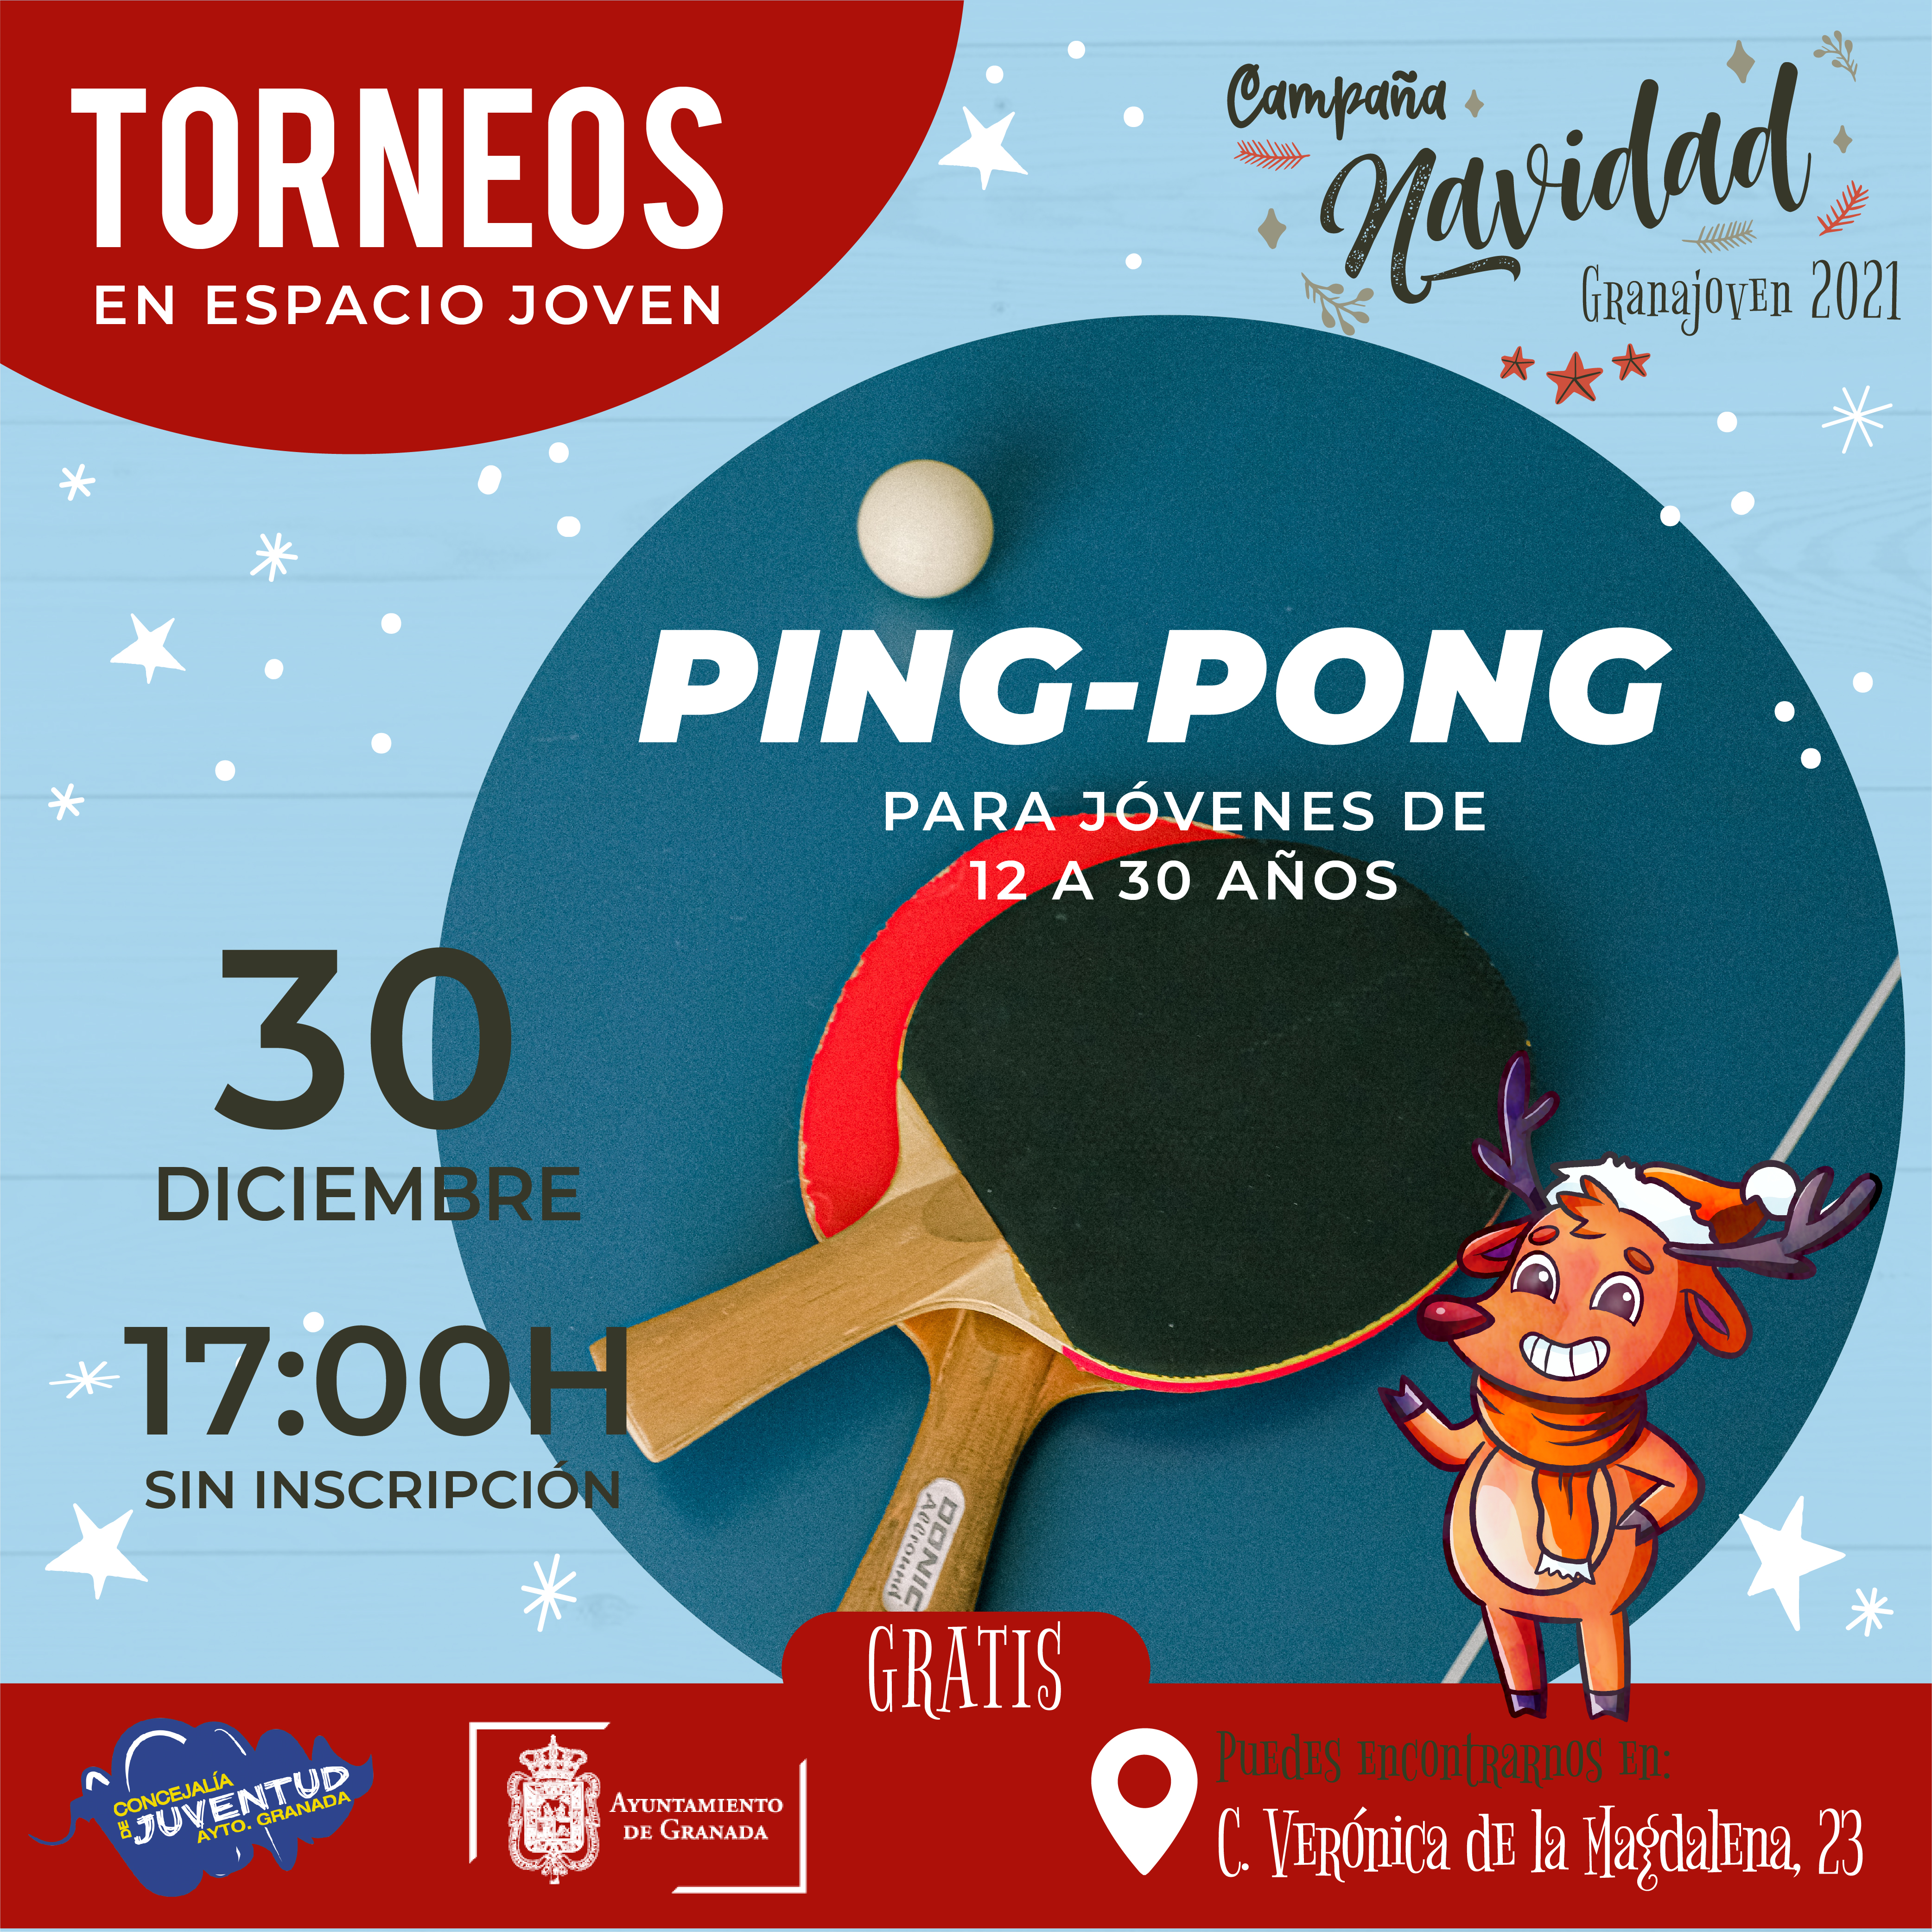 TORNEO PING-PONG